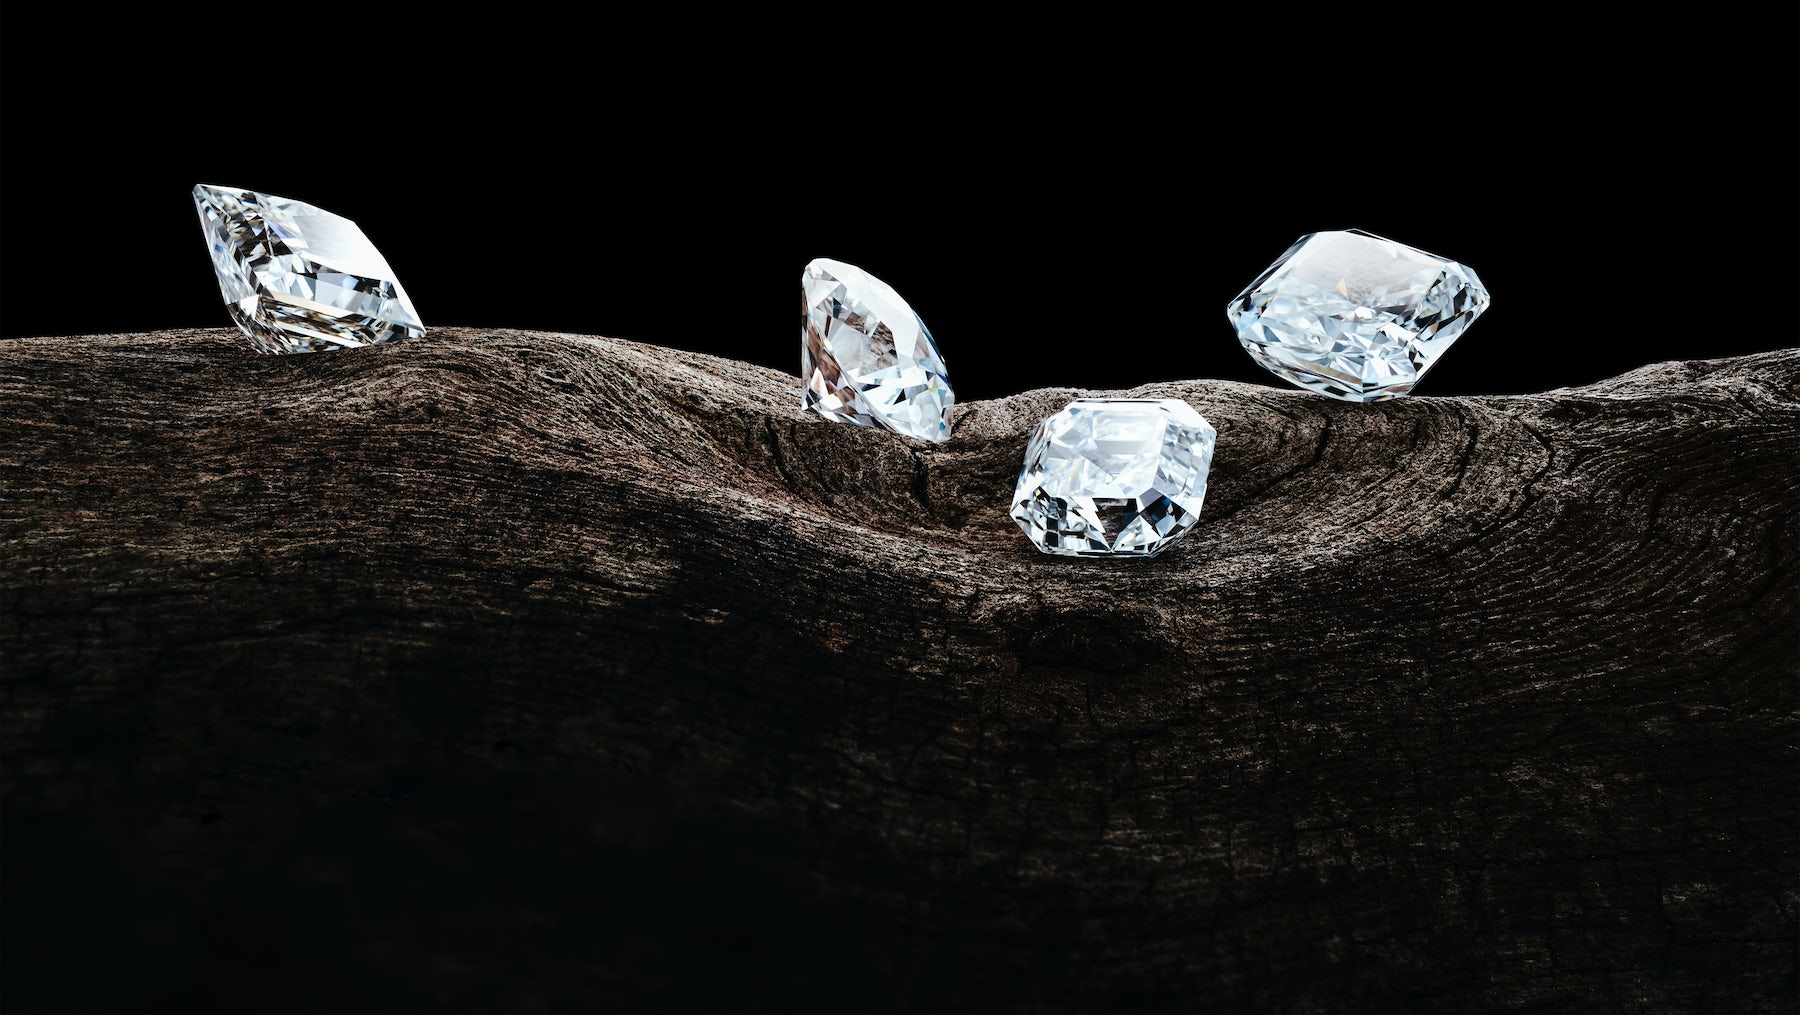 DOES LVMH'S FORAY INTO LAB-GROWN DIAMONDS SIGNAL LUXURY BRANDS' ACCEPTANCE  OF SYNTHETIC GOODS?